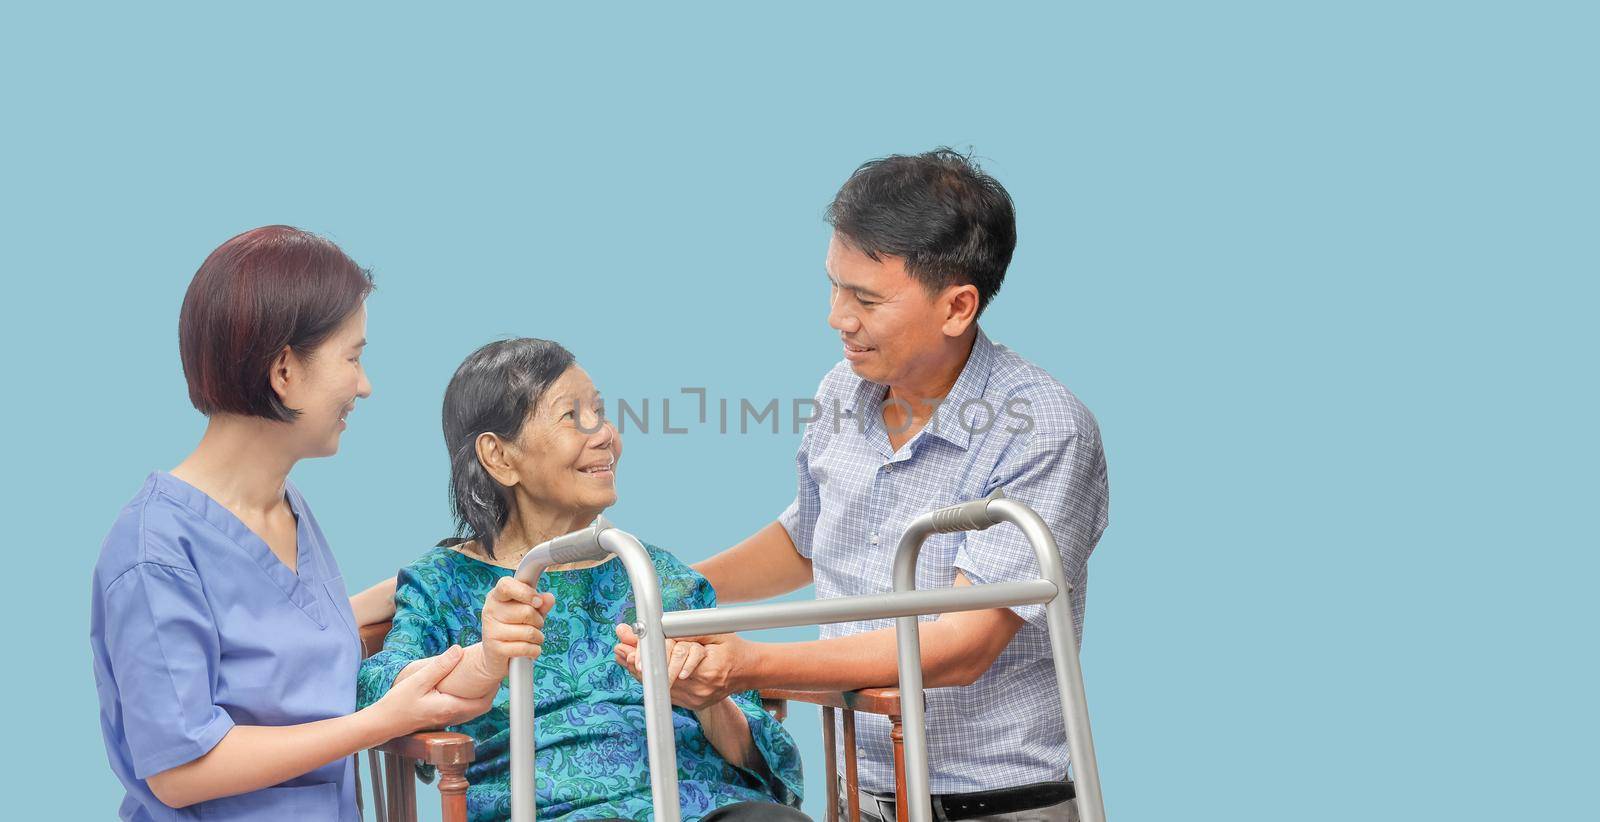 Son looking after elderly mother on wheelchair with caregiver by toa55